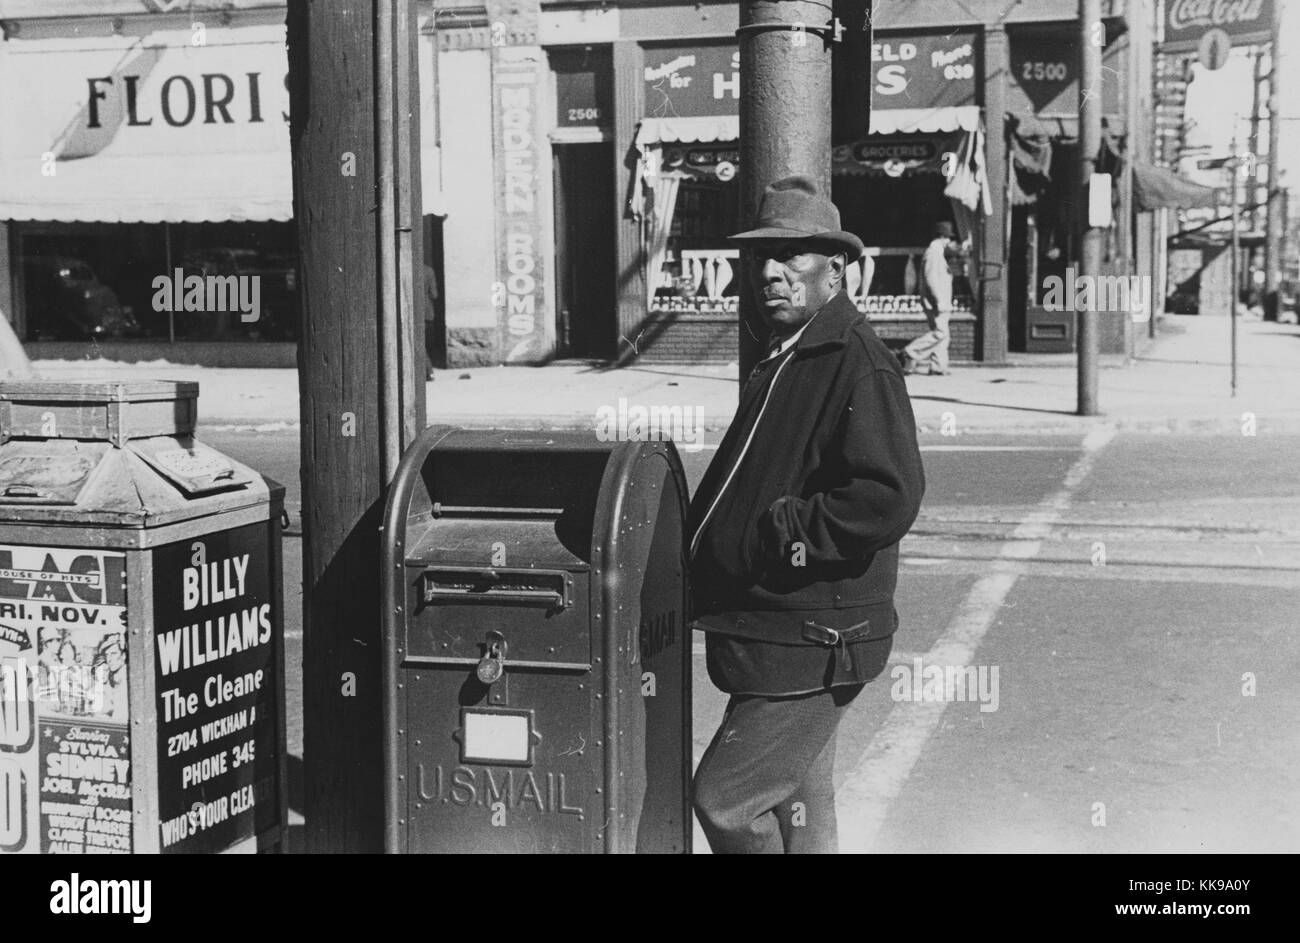 A photograph of a man standing by a United States Postal Service drop box on street corner, the man is wearing a dark colored jacket, pants and a hat, a trash bin is located next to the drop box and contains advertisements for local businesses and events, stores can be seen across the street directly behind the man, Newport News, Virginia, 1940. From the New York Public Library. Stock Photo